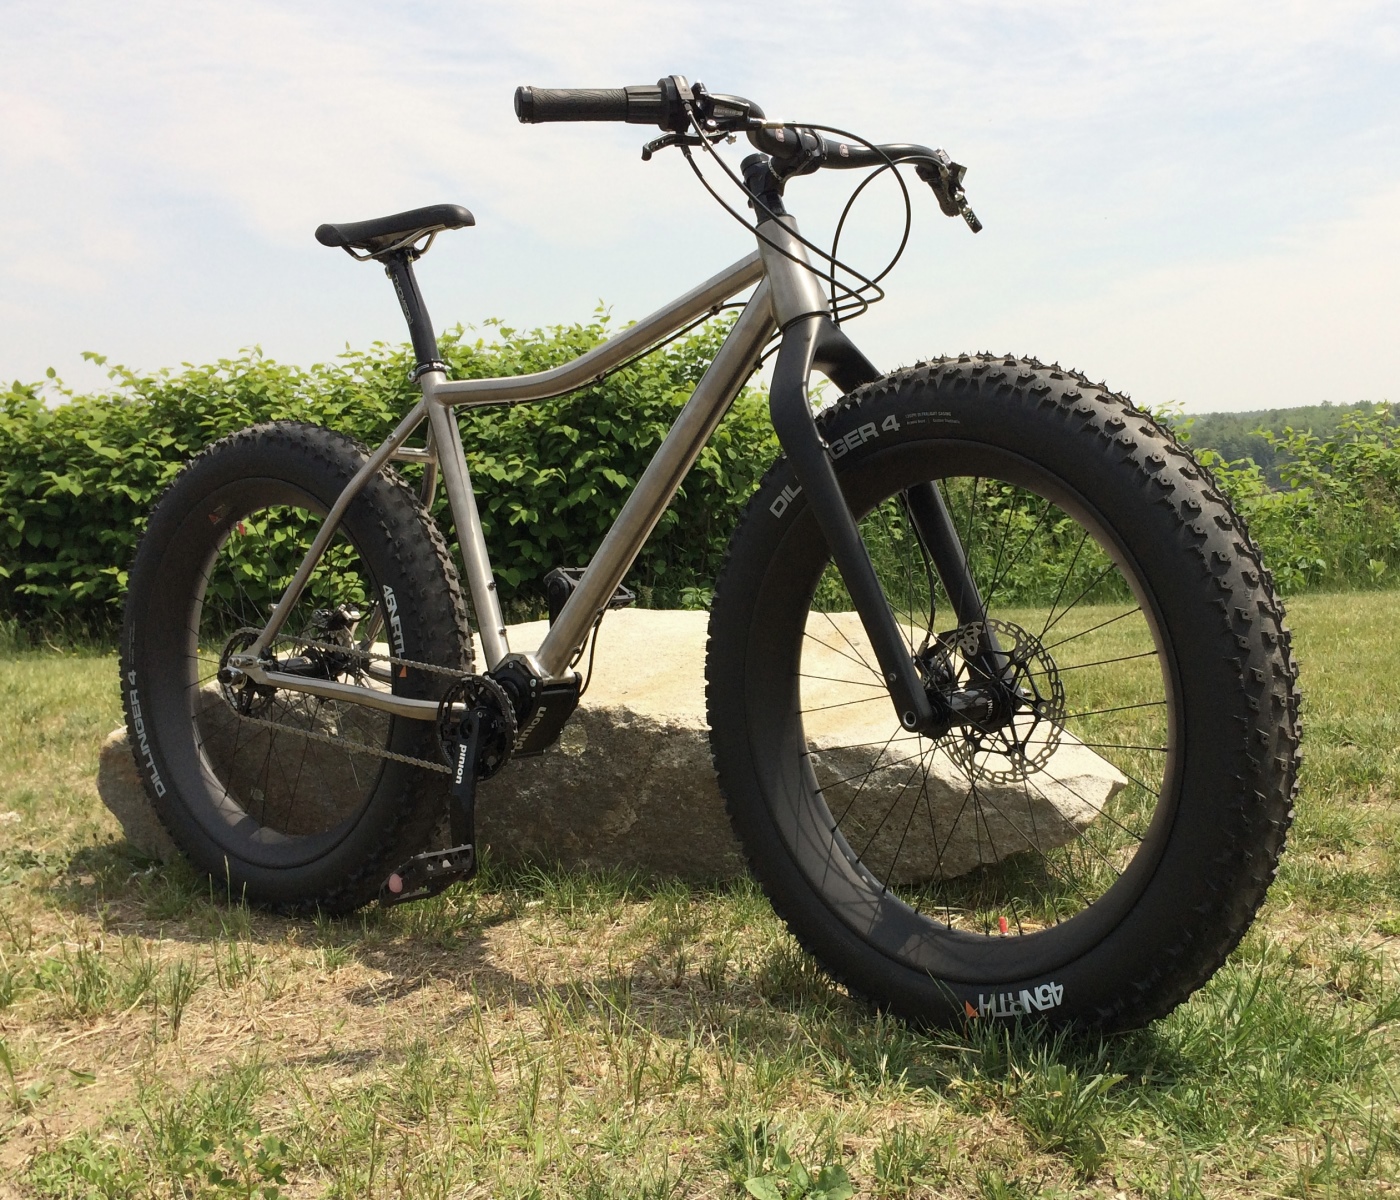 Pinion Gearbox Fatbike by Carver